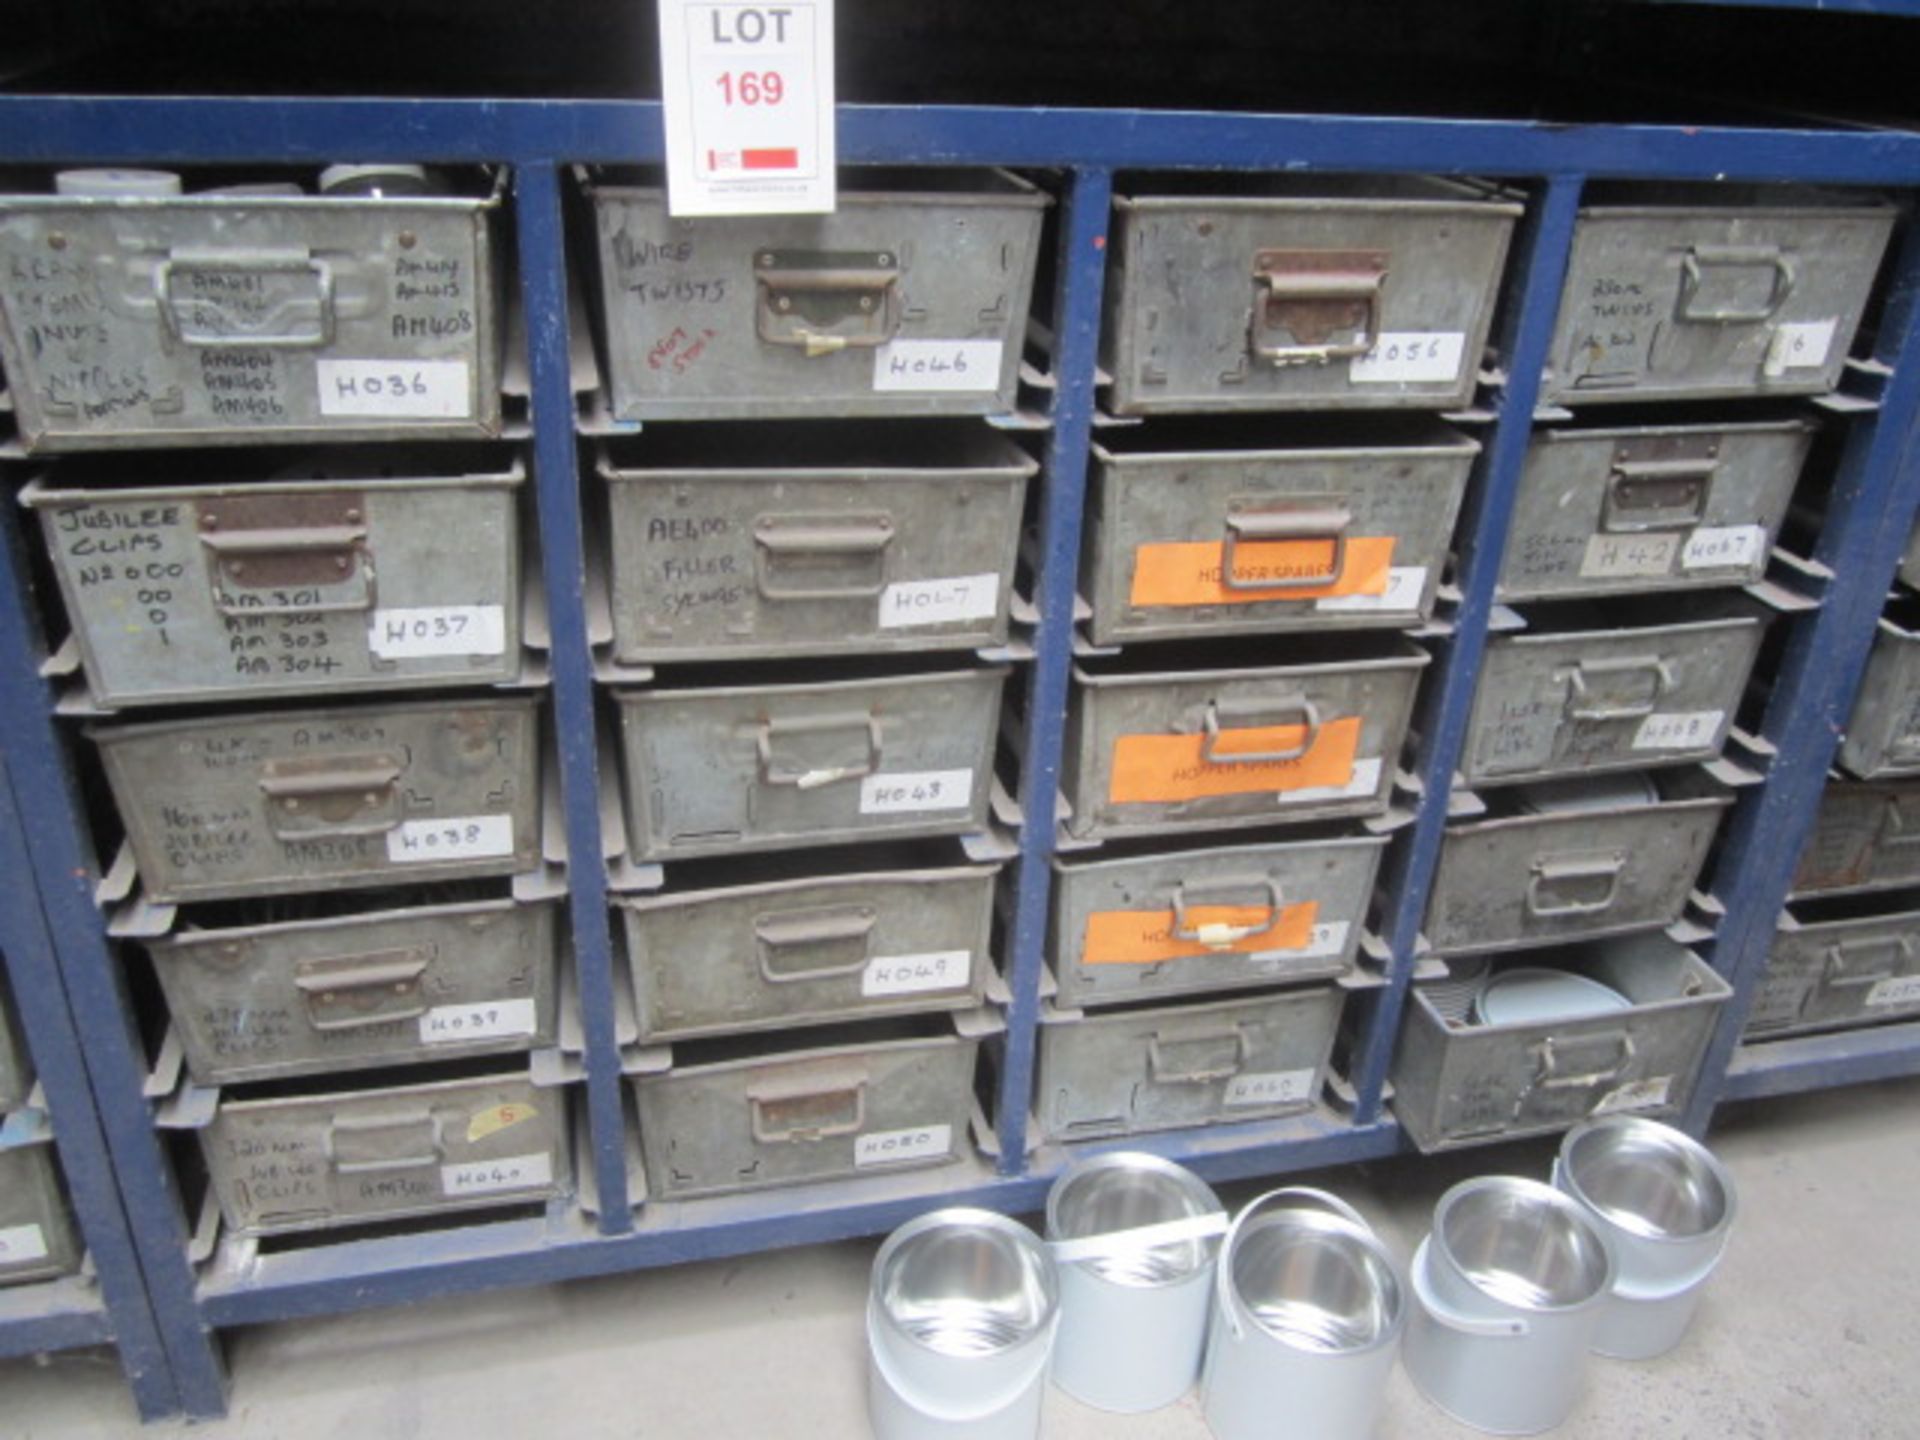 Two steel framed 20 bin storage racks and miscellaneous contents to include fittings, wire ties, - Image 3 of 3